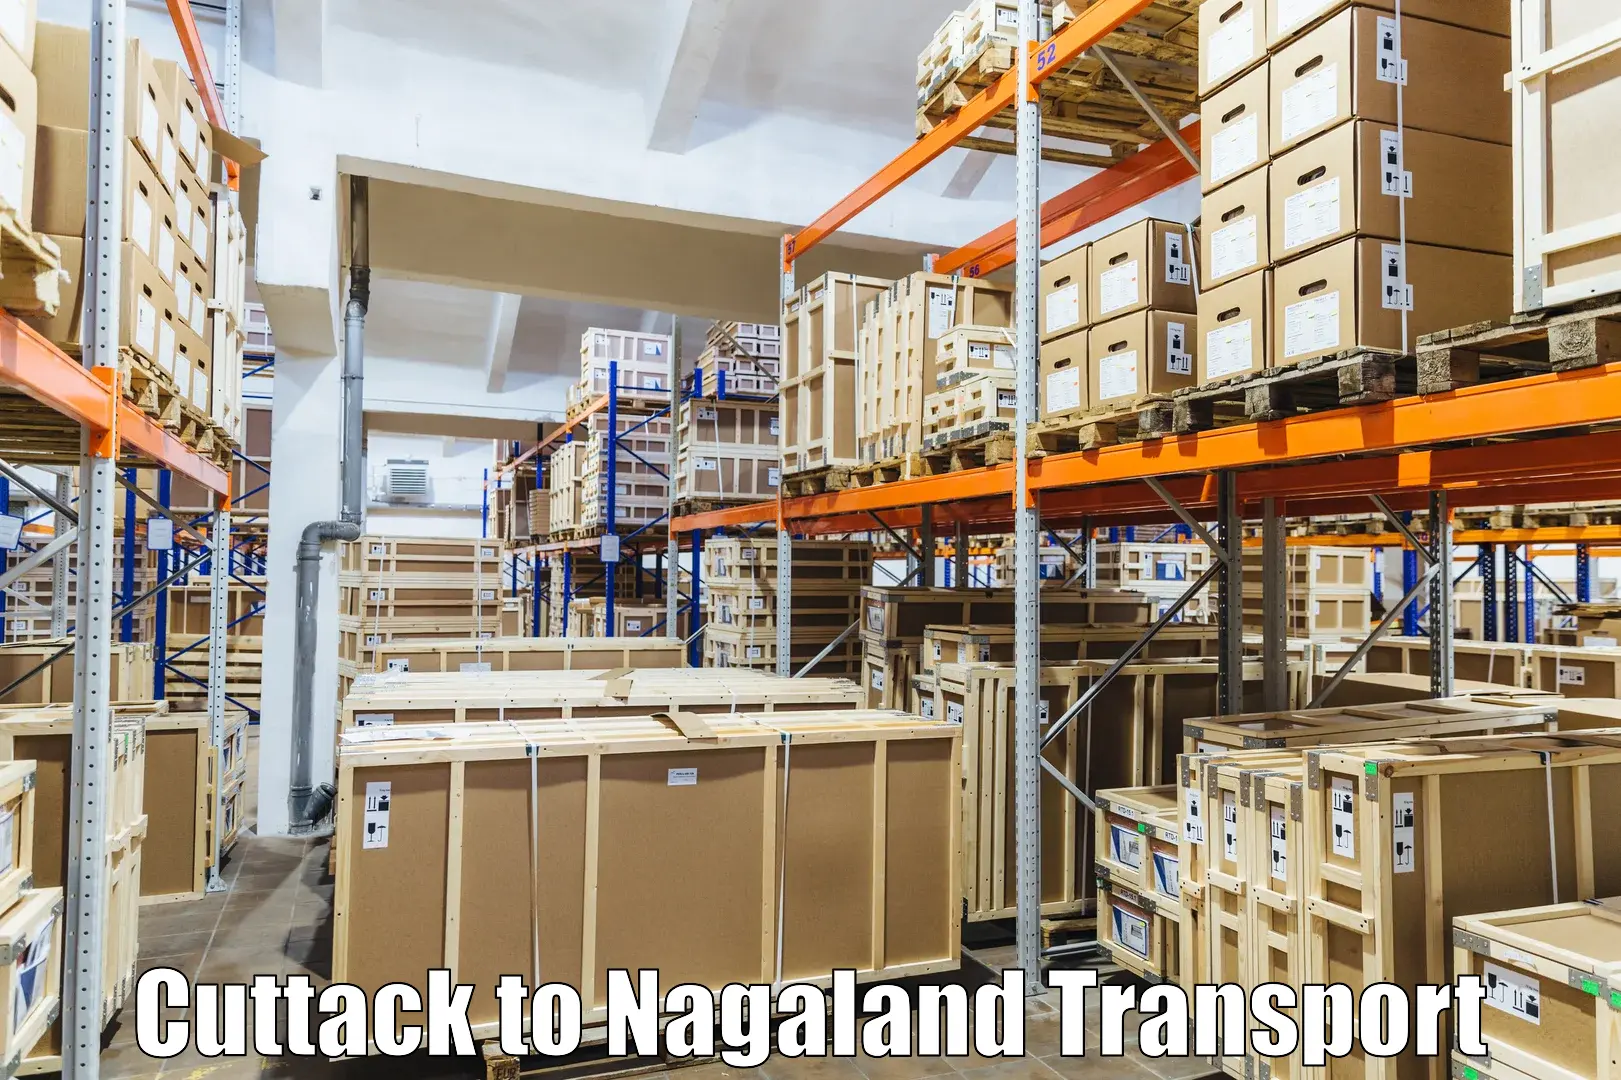 Lorry transport service Cuttack to Nagaland